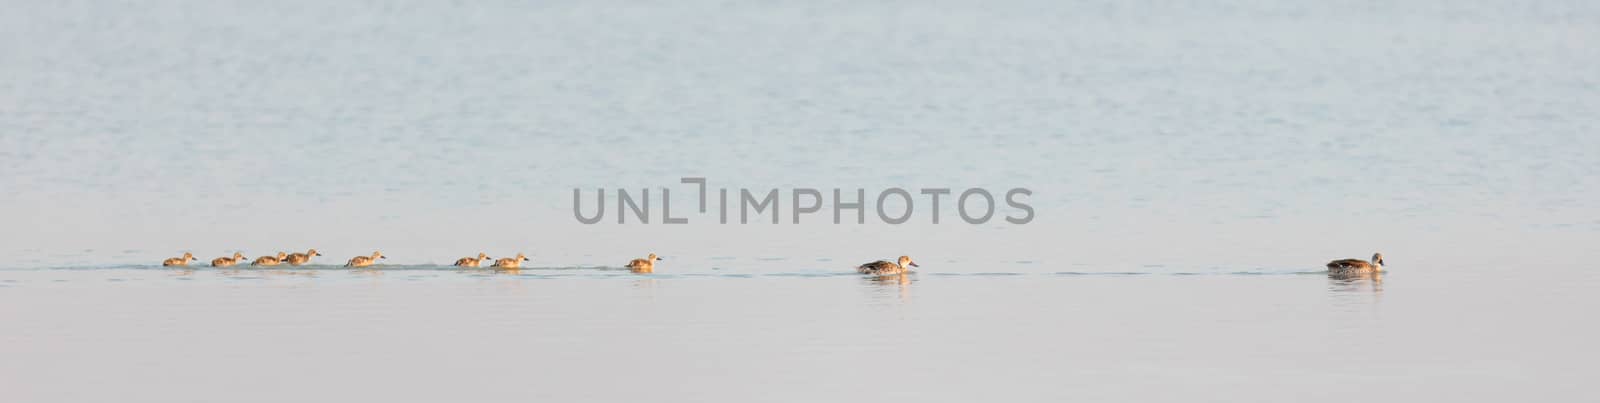 Family of ducks in the Makgadikgadi pans by michaklootwijk